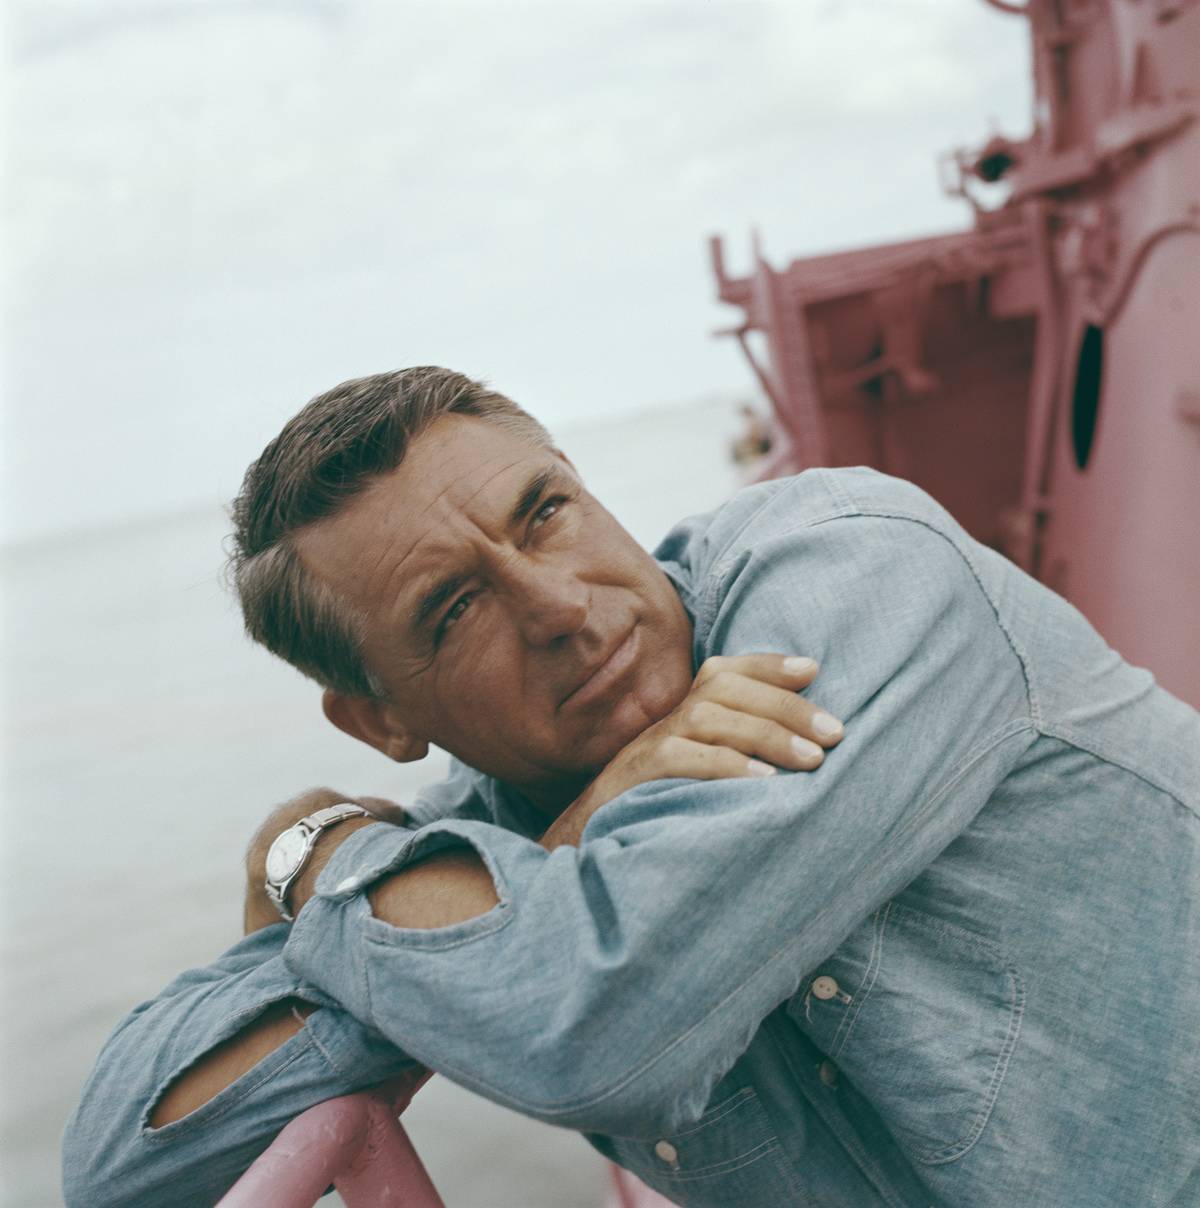 <p>In 1941, a phrase that was taken from Hollywood was "dreamboat." And when we say it was taken from Hollywood, we mean that people would use the slang word in reference to one person in particular: any good looking actor, such as Cary Grant.</p> <p>The 1940s were part of the classic age of Hollywood cinema, and it many attractive actors who looked way too good in a three-piece suit. Talents such as Grant, Humphrey Bogart, and even James Stewart were considered dreamboats back in the day!</p>